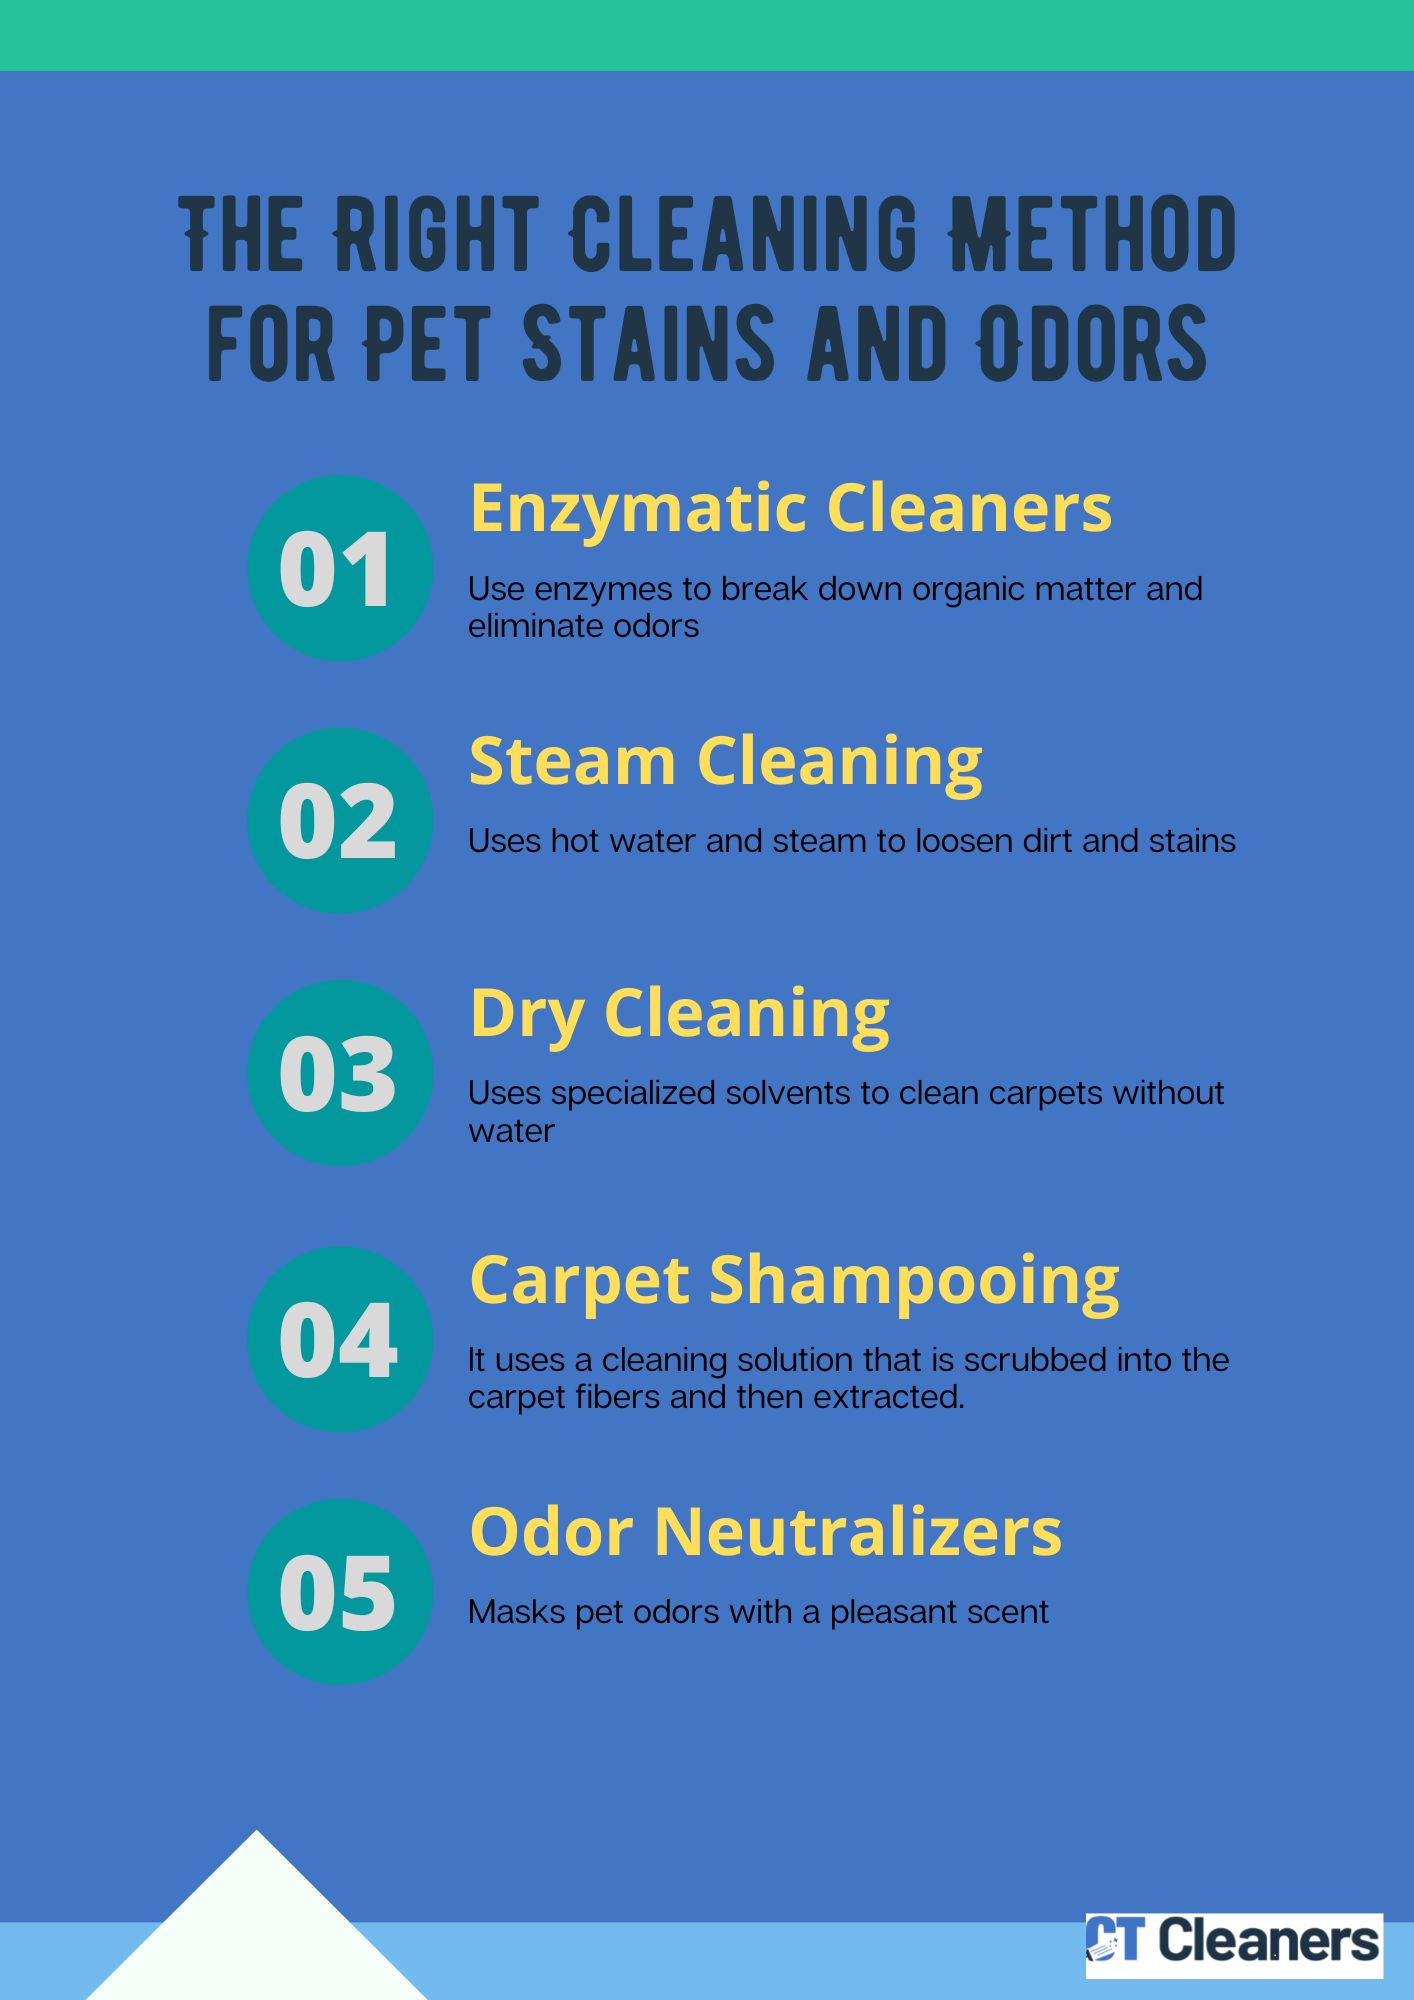 The Right Cleaning Method for Pet Stains and Odors